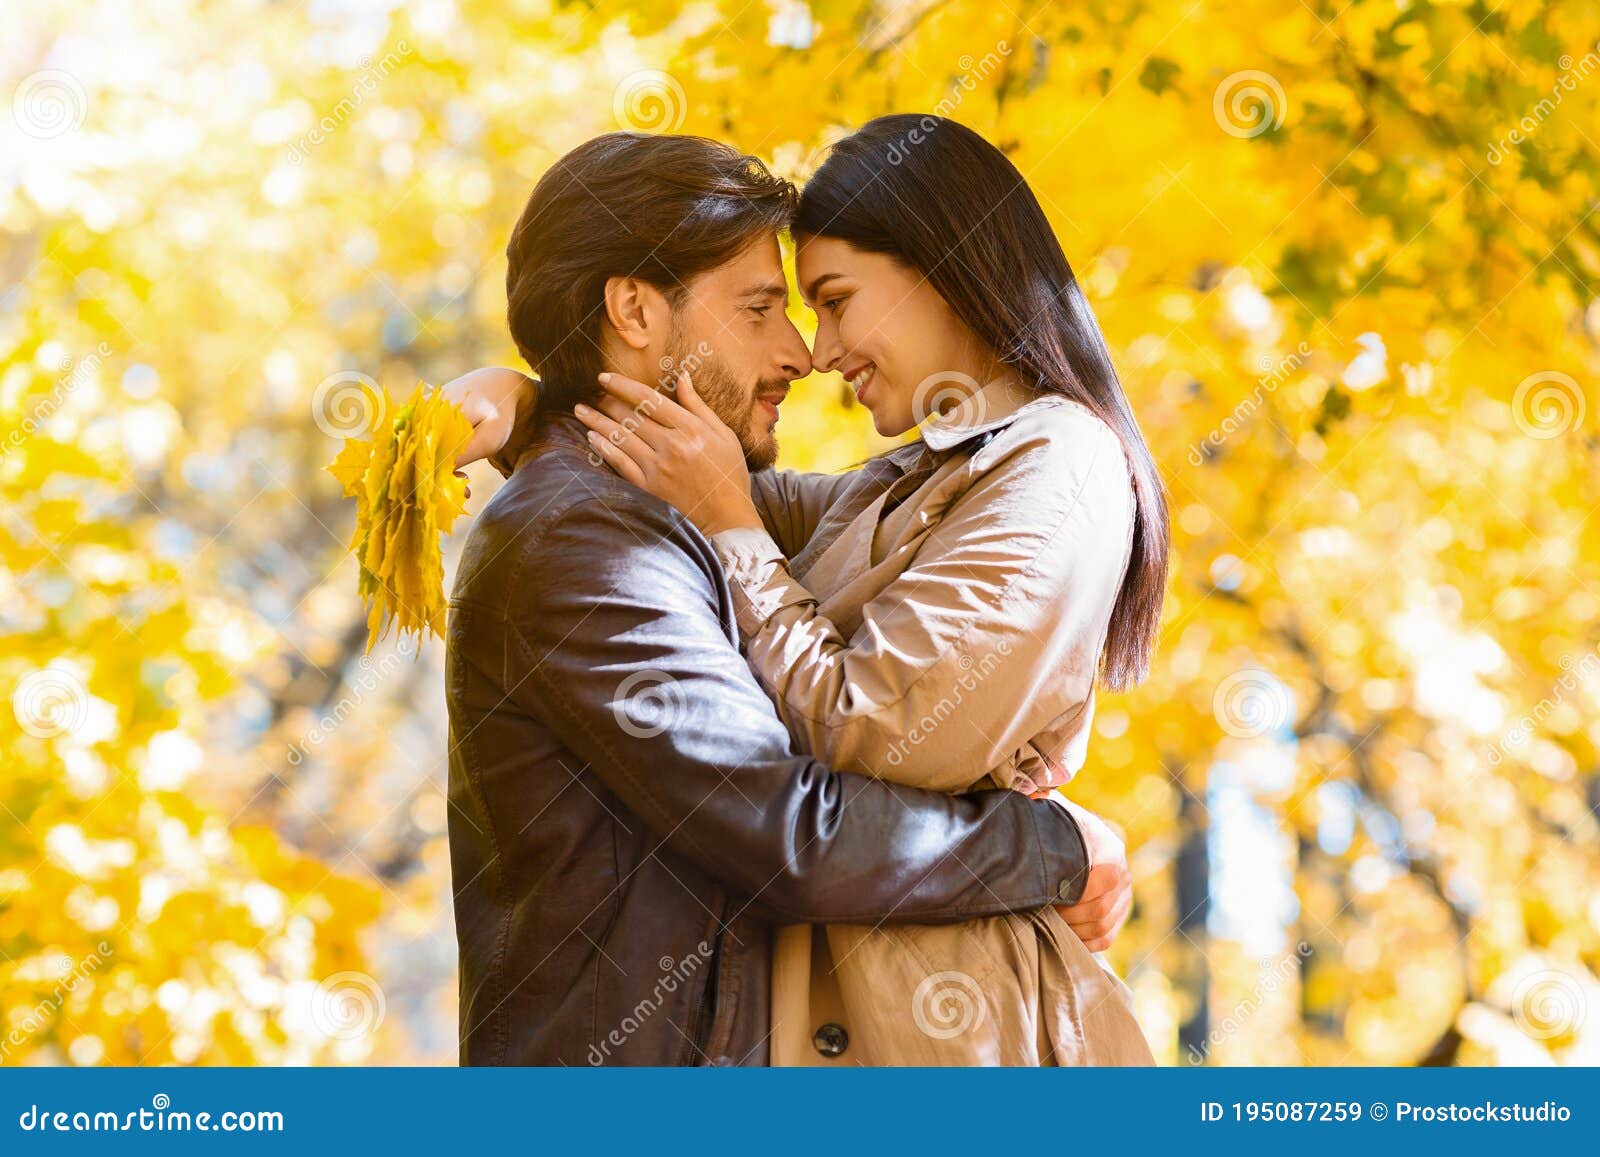 Man And Woman In Love Embracing Looking At Each Other Stock Image Image Of Beautiful Happy